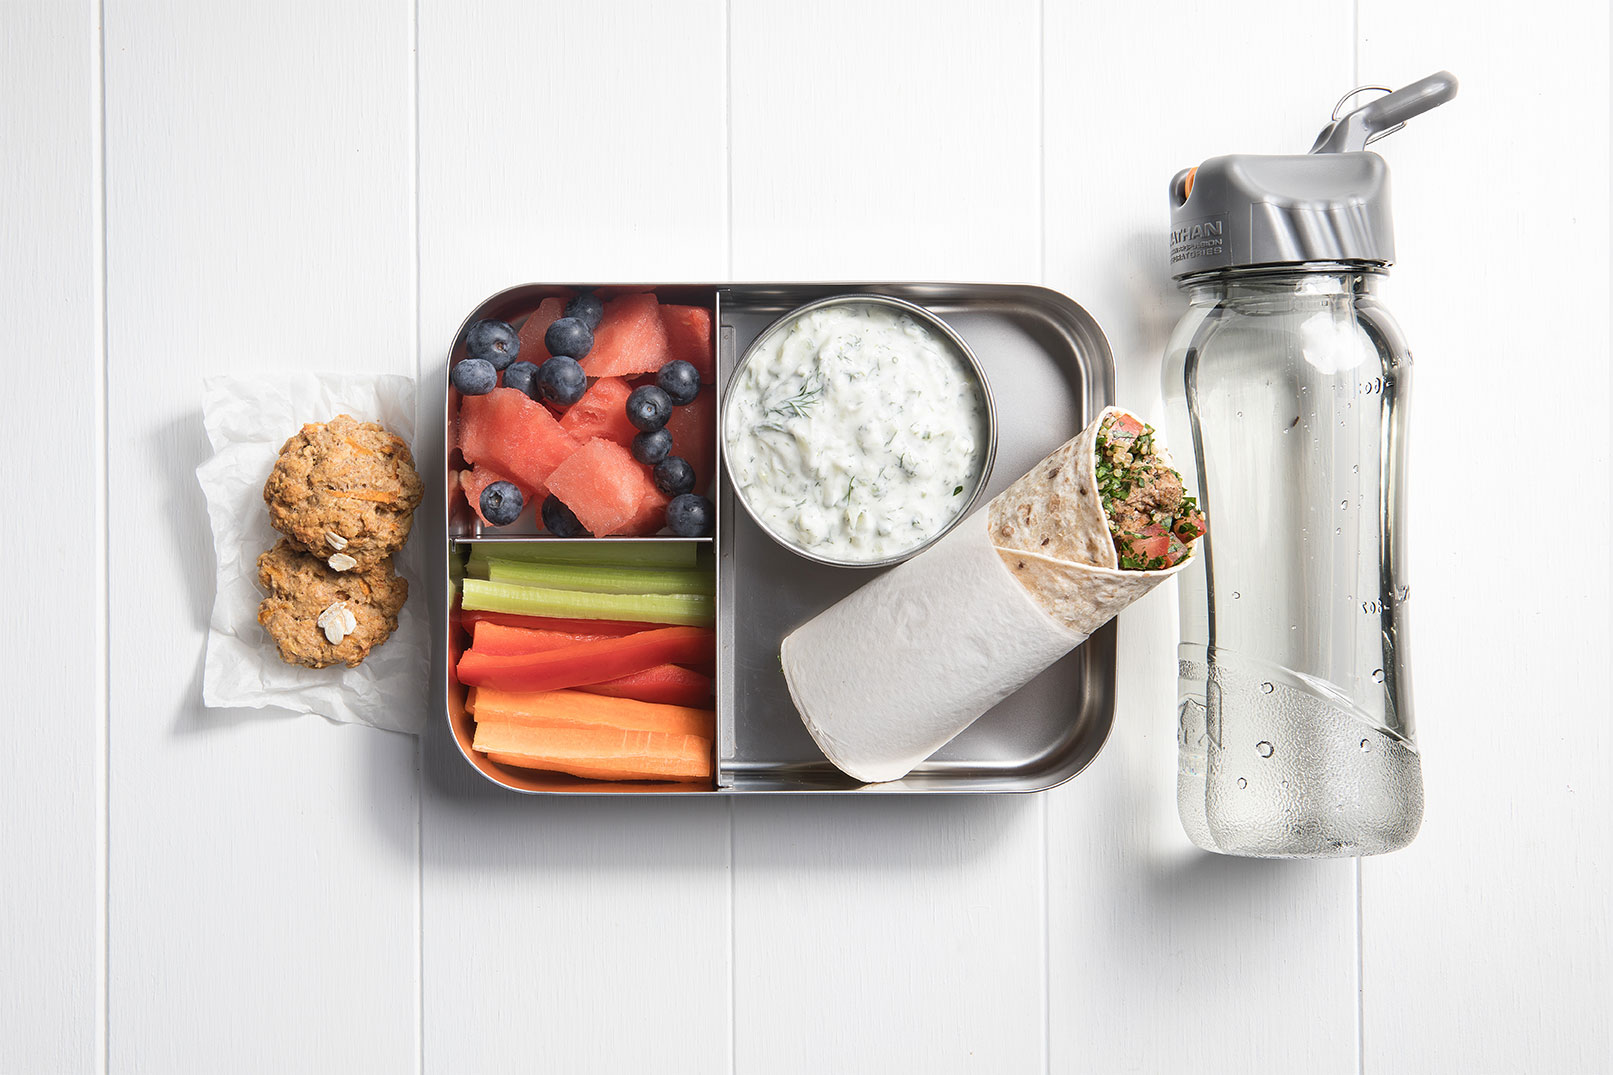 Image of a packed lunch box with beef kofta and tabouli wrap, vegie sticks with tzatziki, watermelon and blueberries, two carrot oast biscuits and a bottle of water on the side